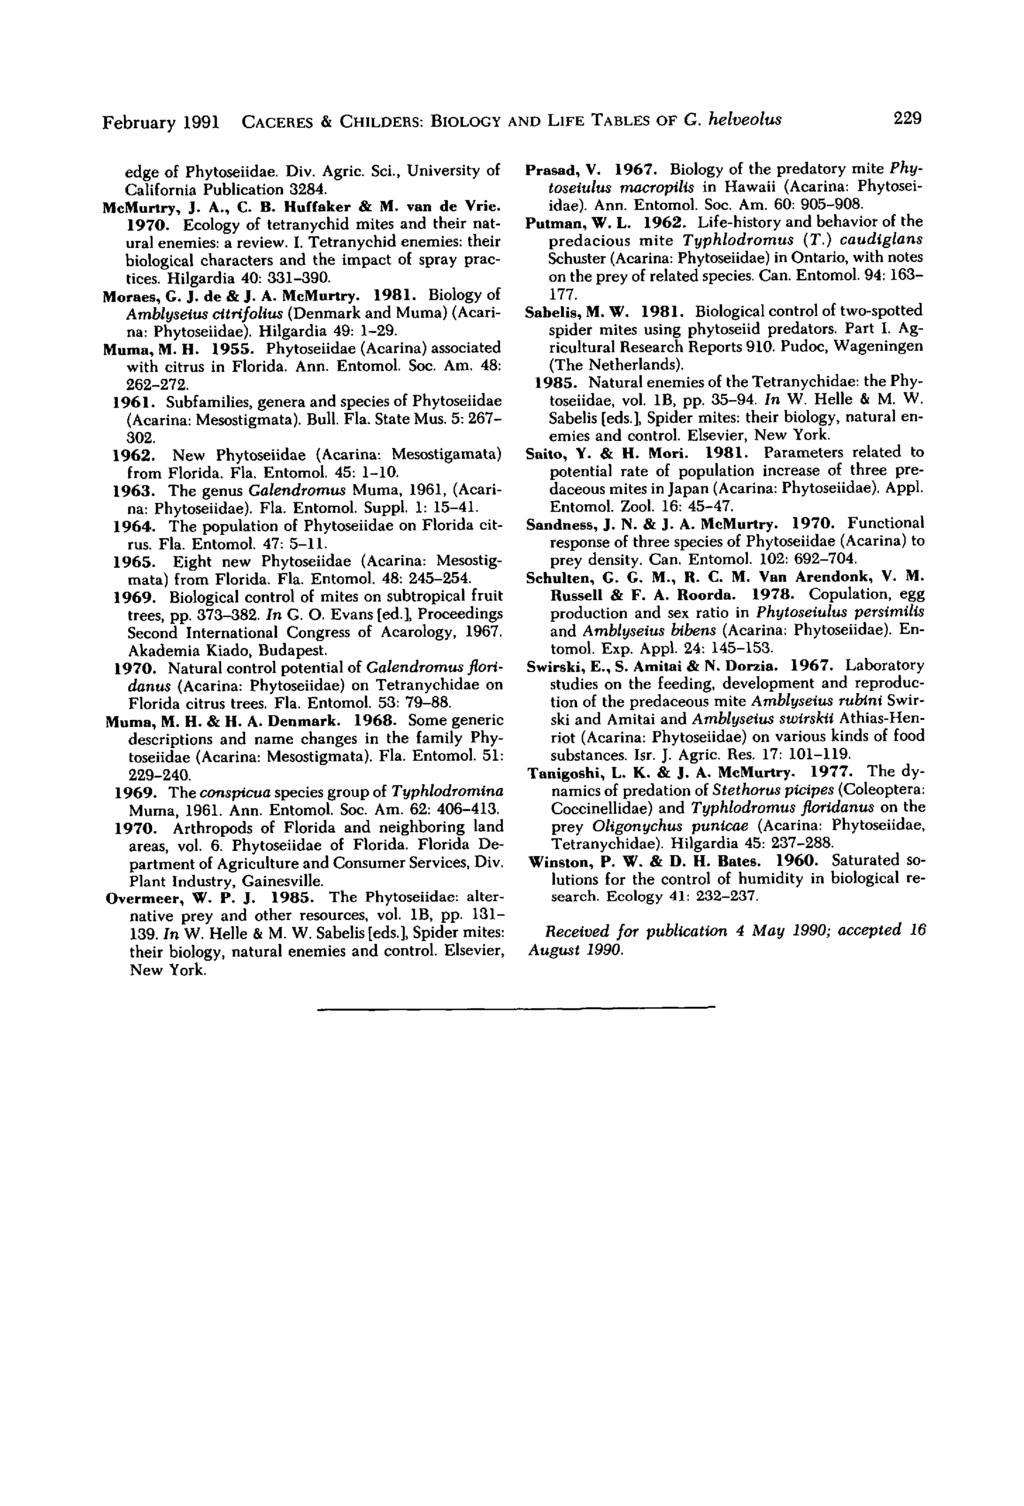 February 1991 CACERES & CHILDERS: BIOLOGY AND LIFE TABLES OF G. helveolus 229 edge of Phytoseiidae. Div. Agric. Sci., University of California Publication 3284. McMurtry, J. A., C. B. Huffaker & M.